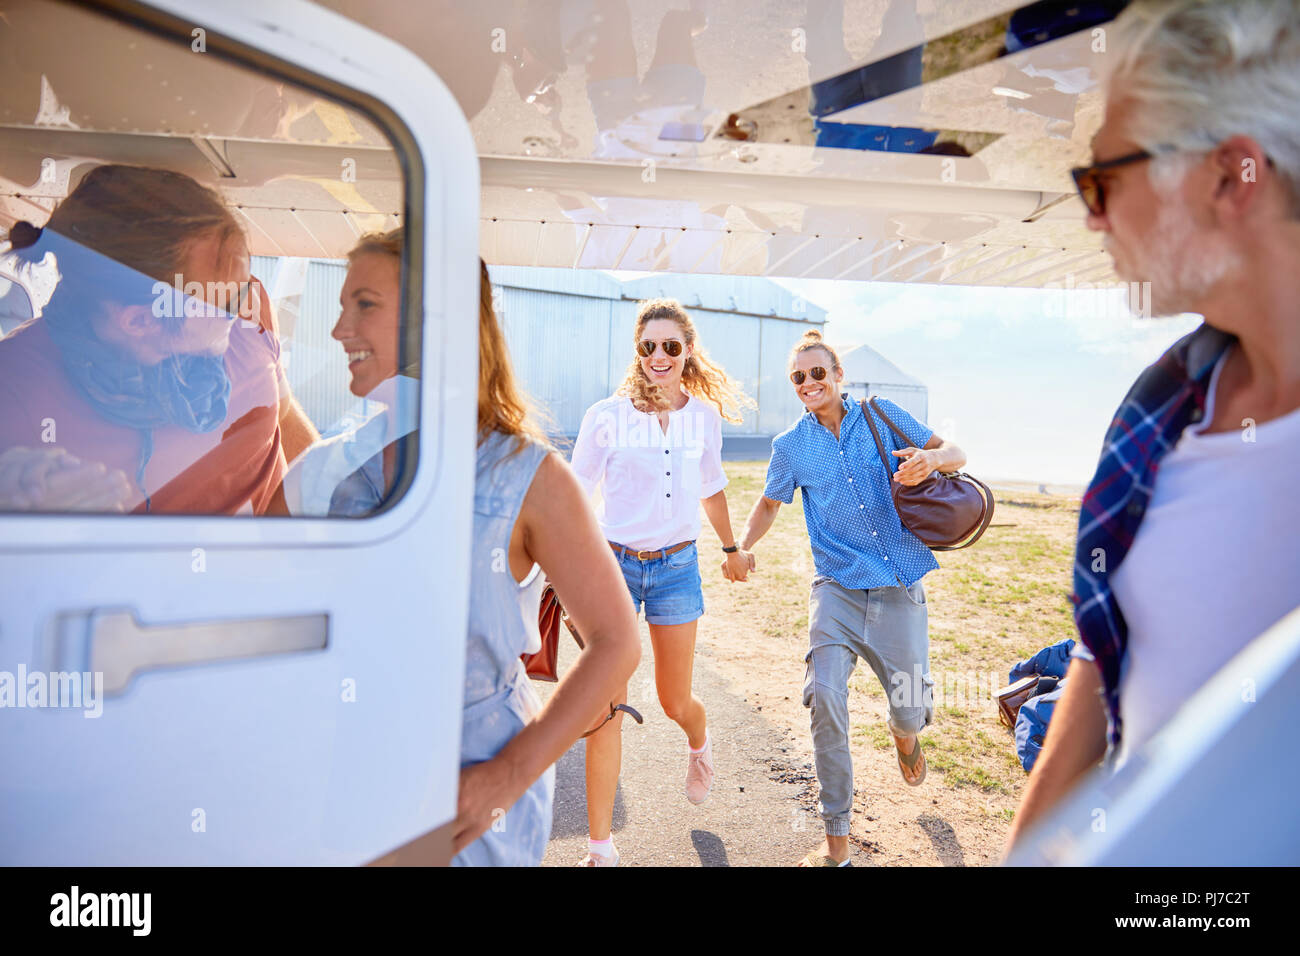 Friends boarding small airplane Stock Photo